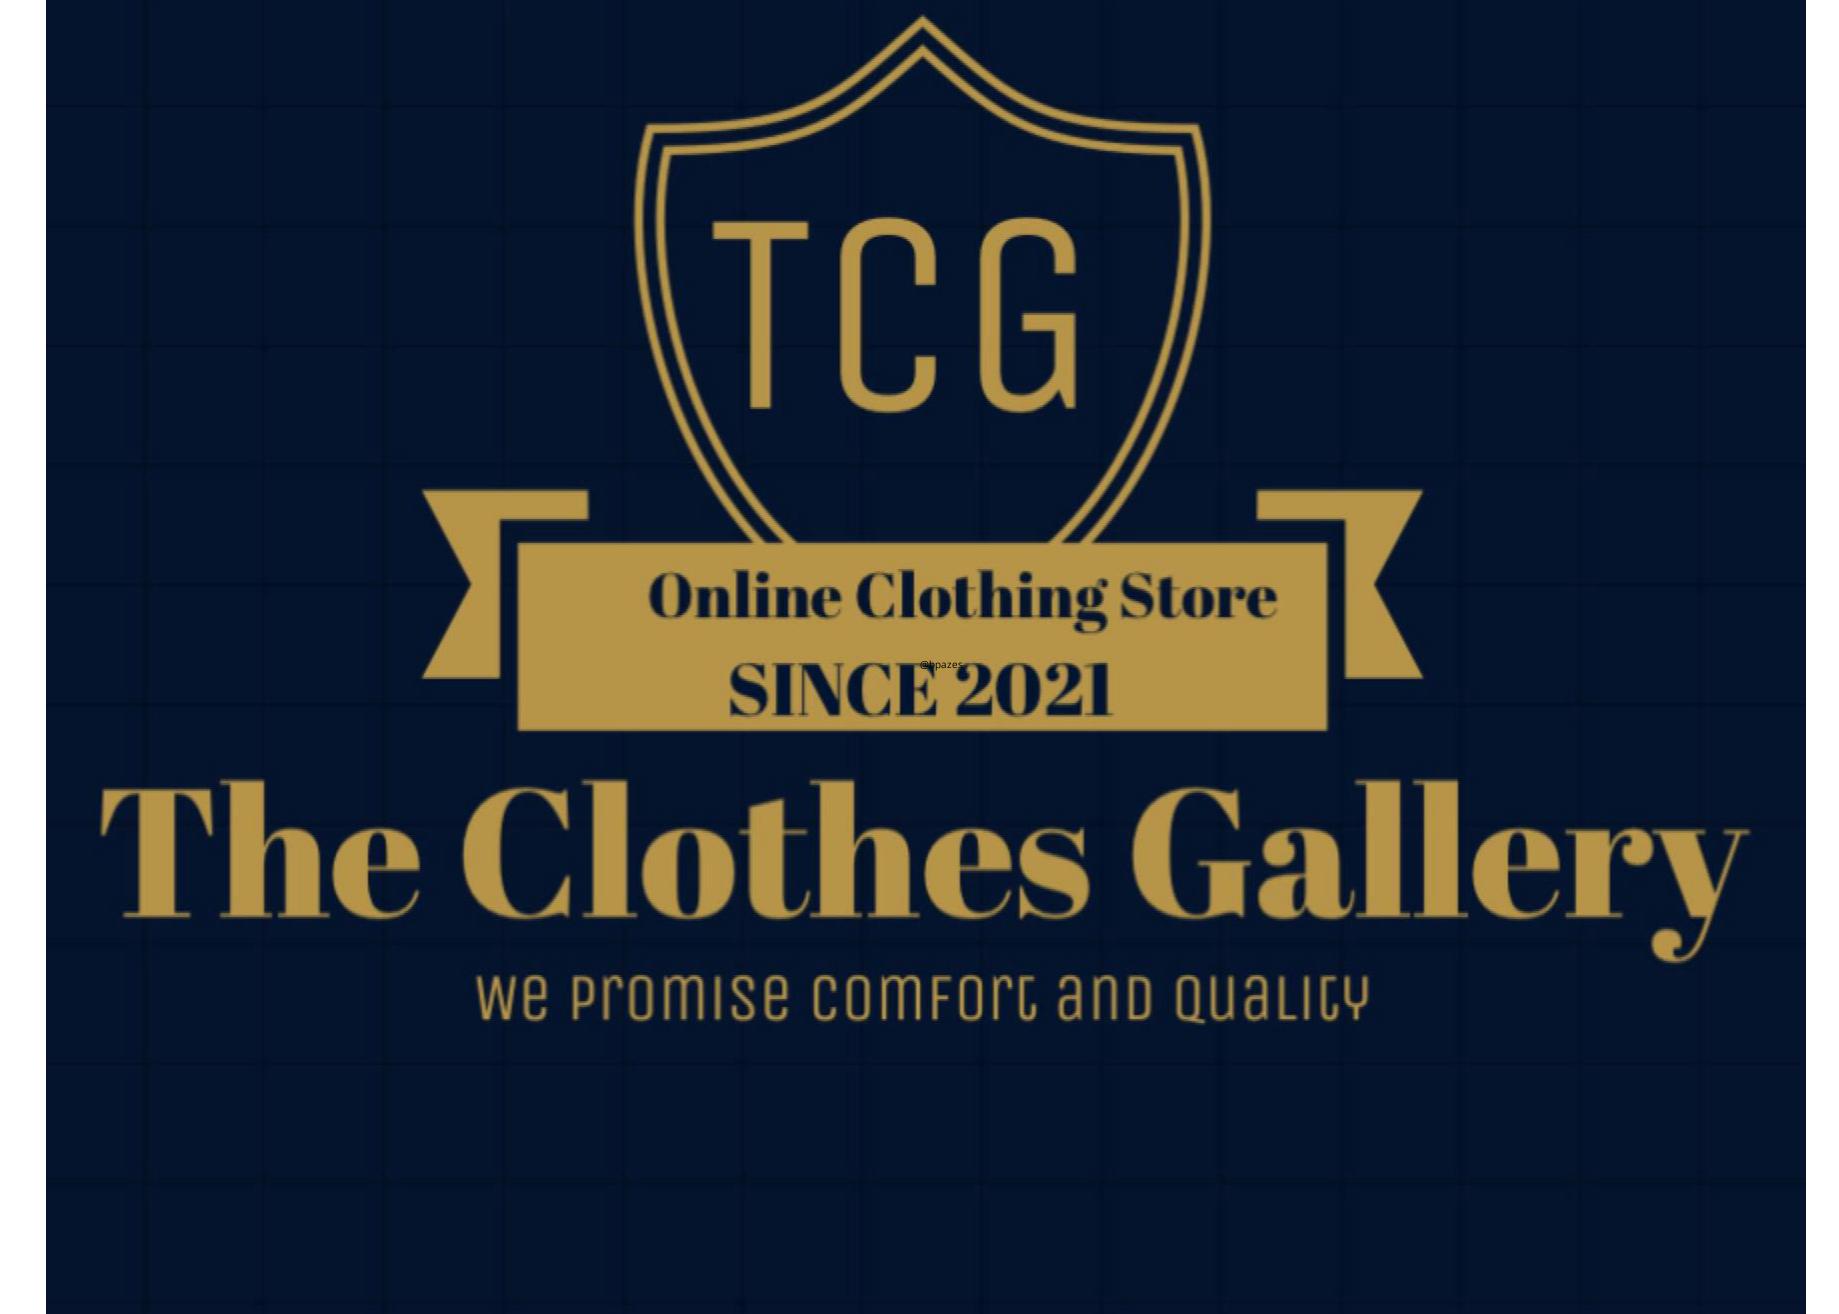 The Clothes Gallery